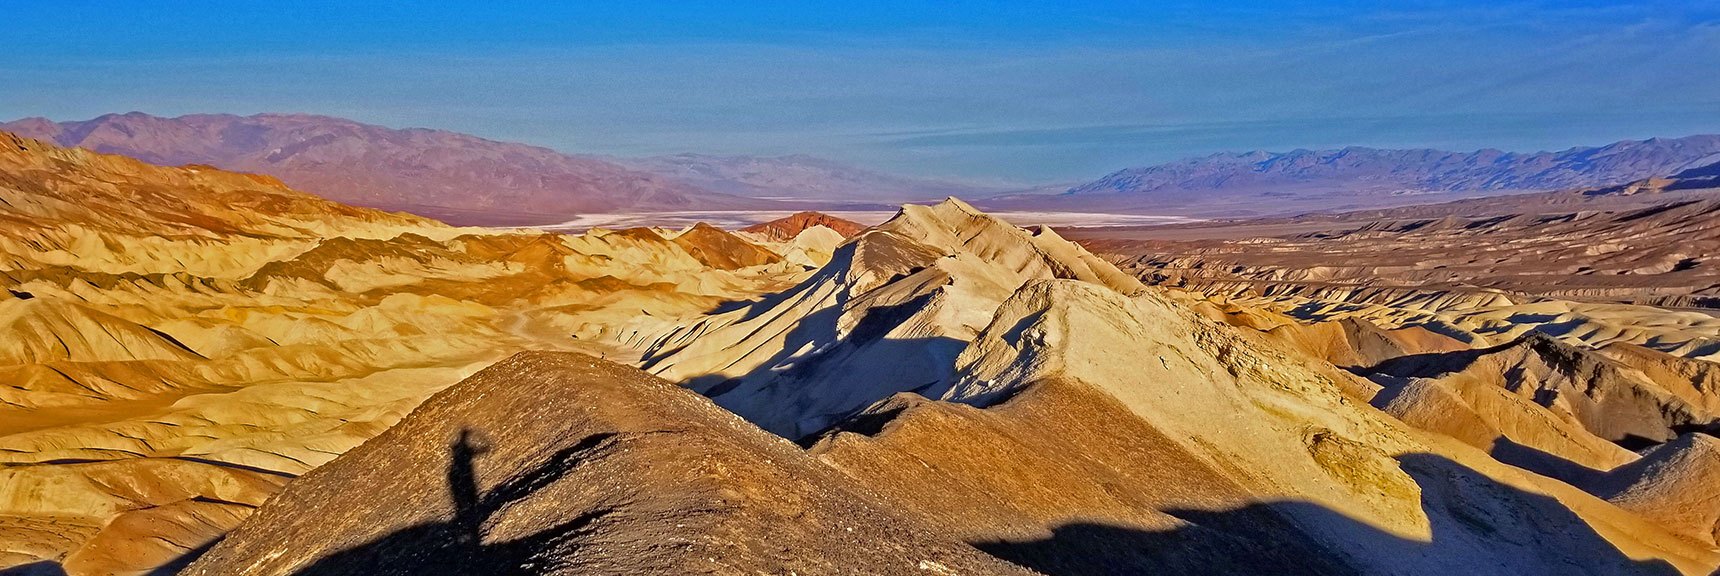 View North Up the Length of Death Valley from High Canyon Ridge. | Twenty Mule Team Canyon | Death Valley National Park, California